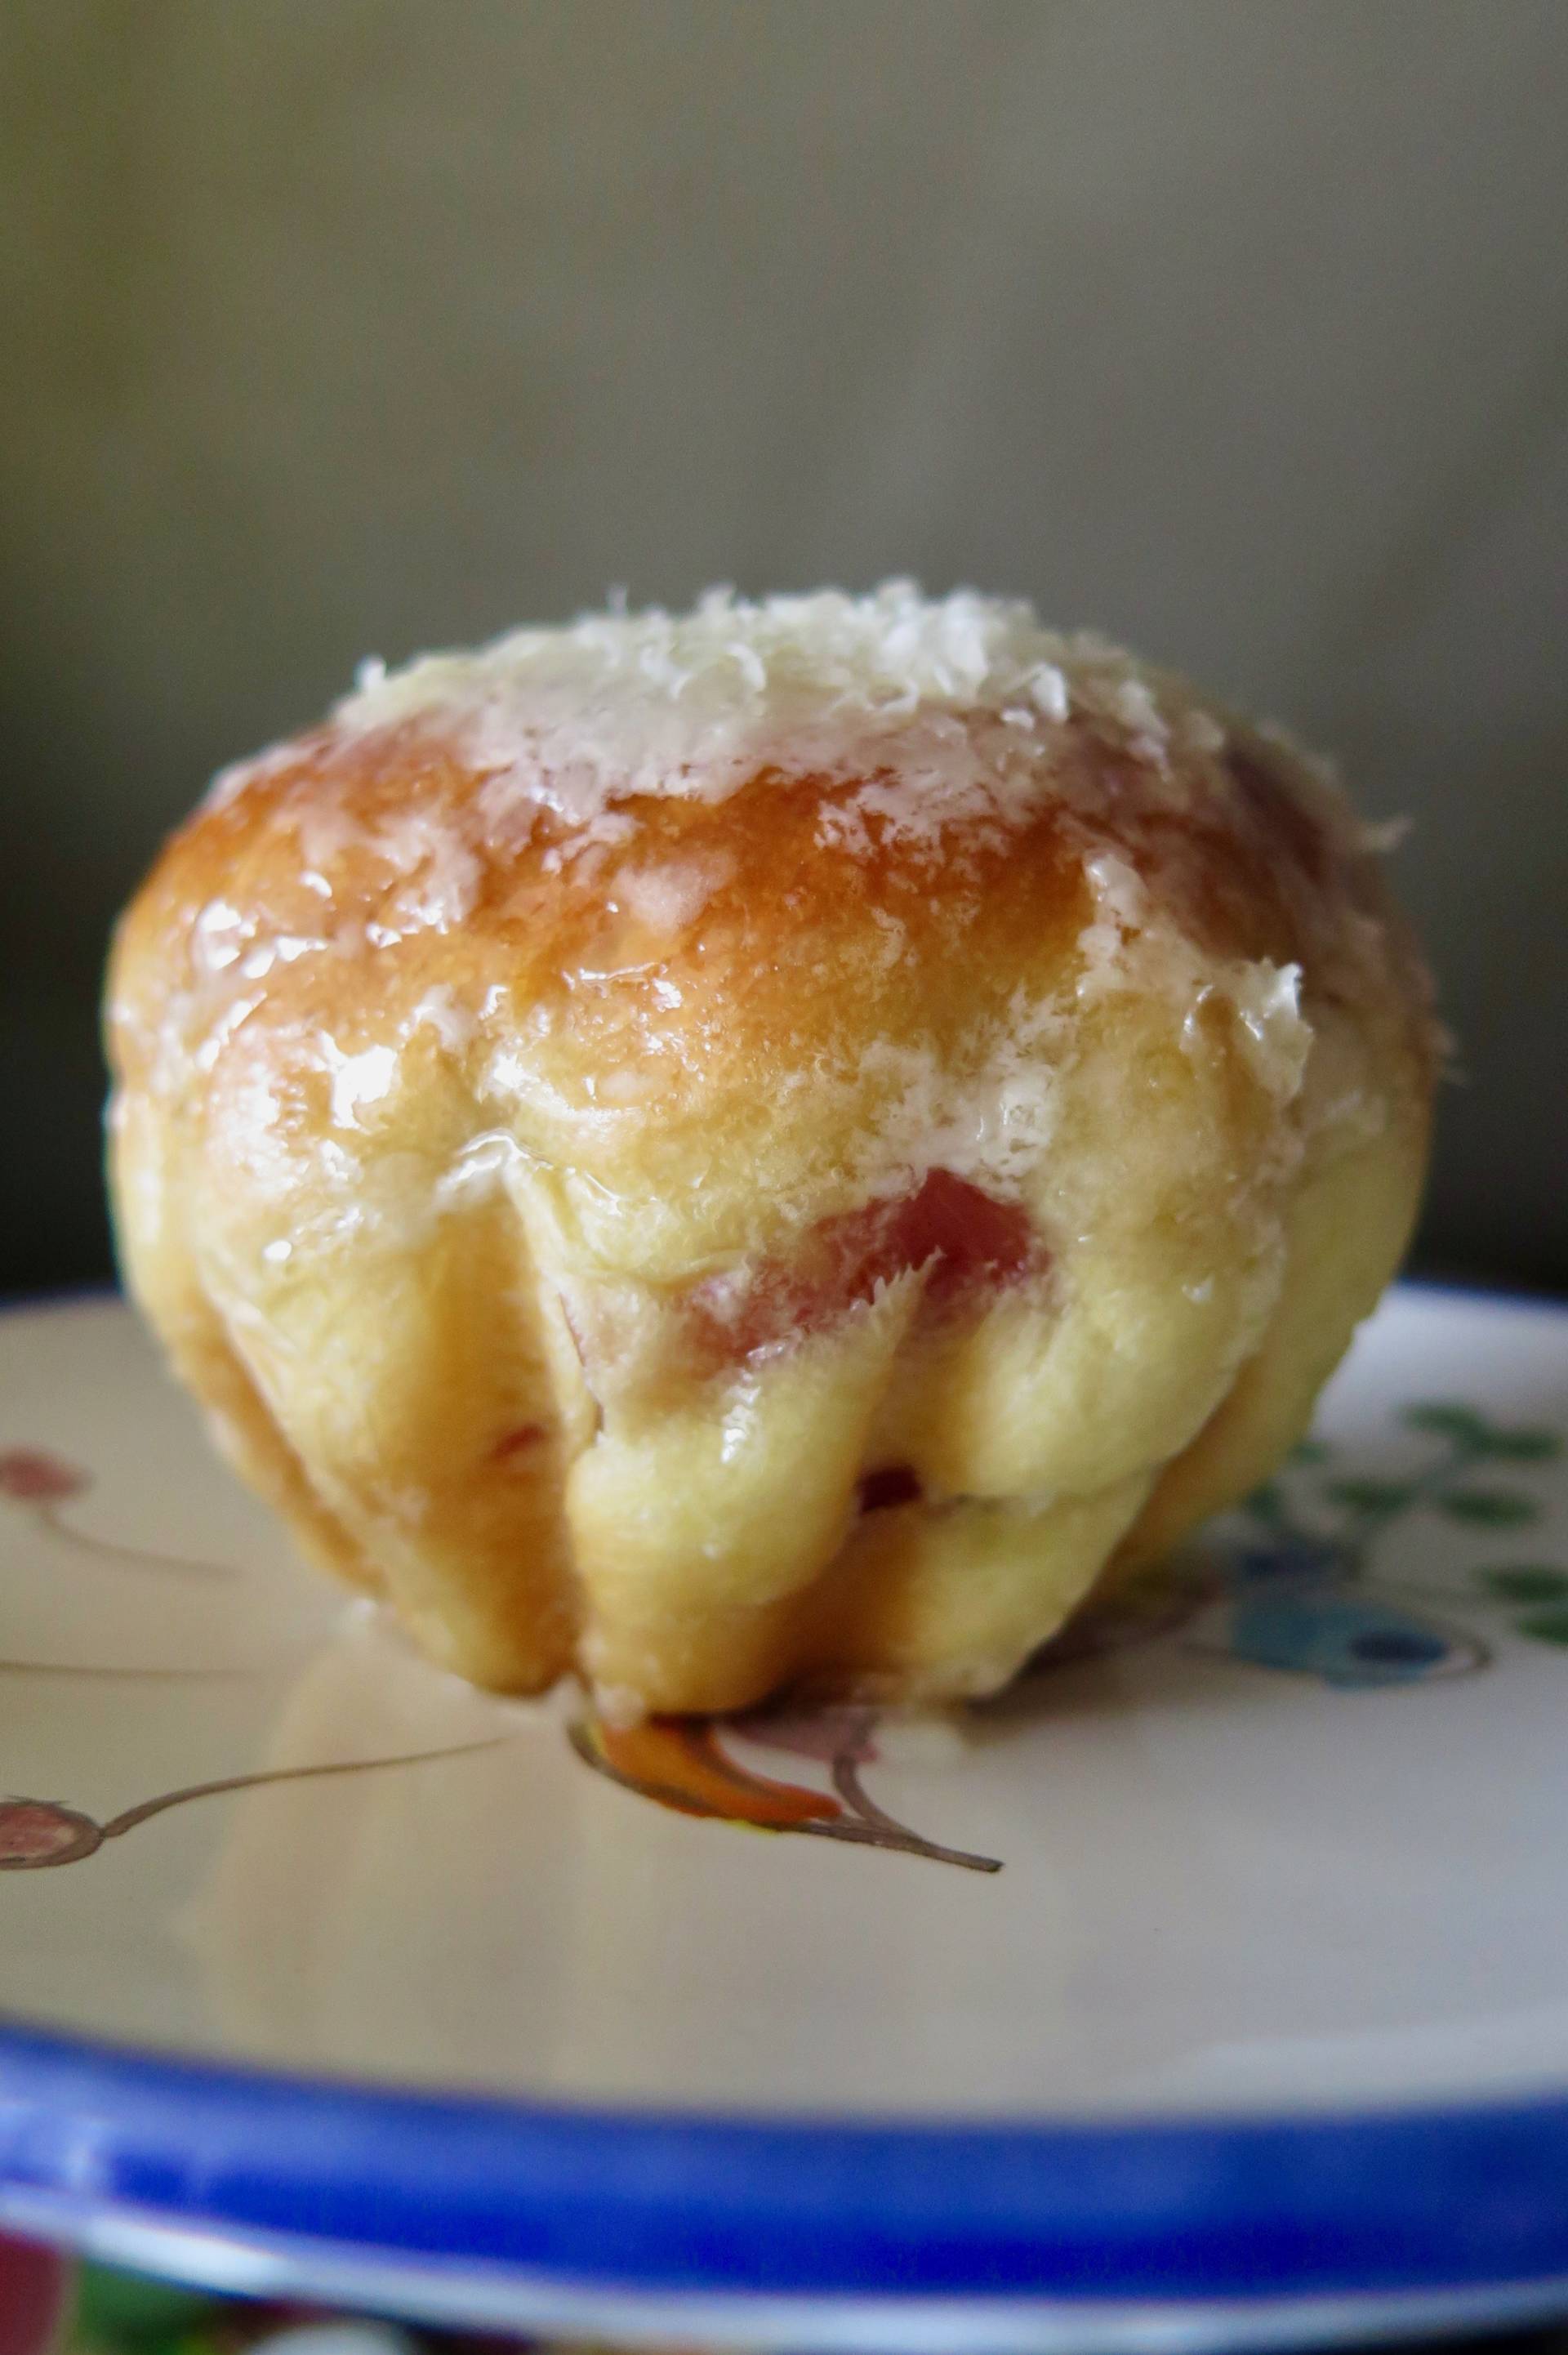 The ham and cheese ensaymada from Breadbelly is something you’ll want to chase down. 